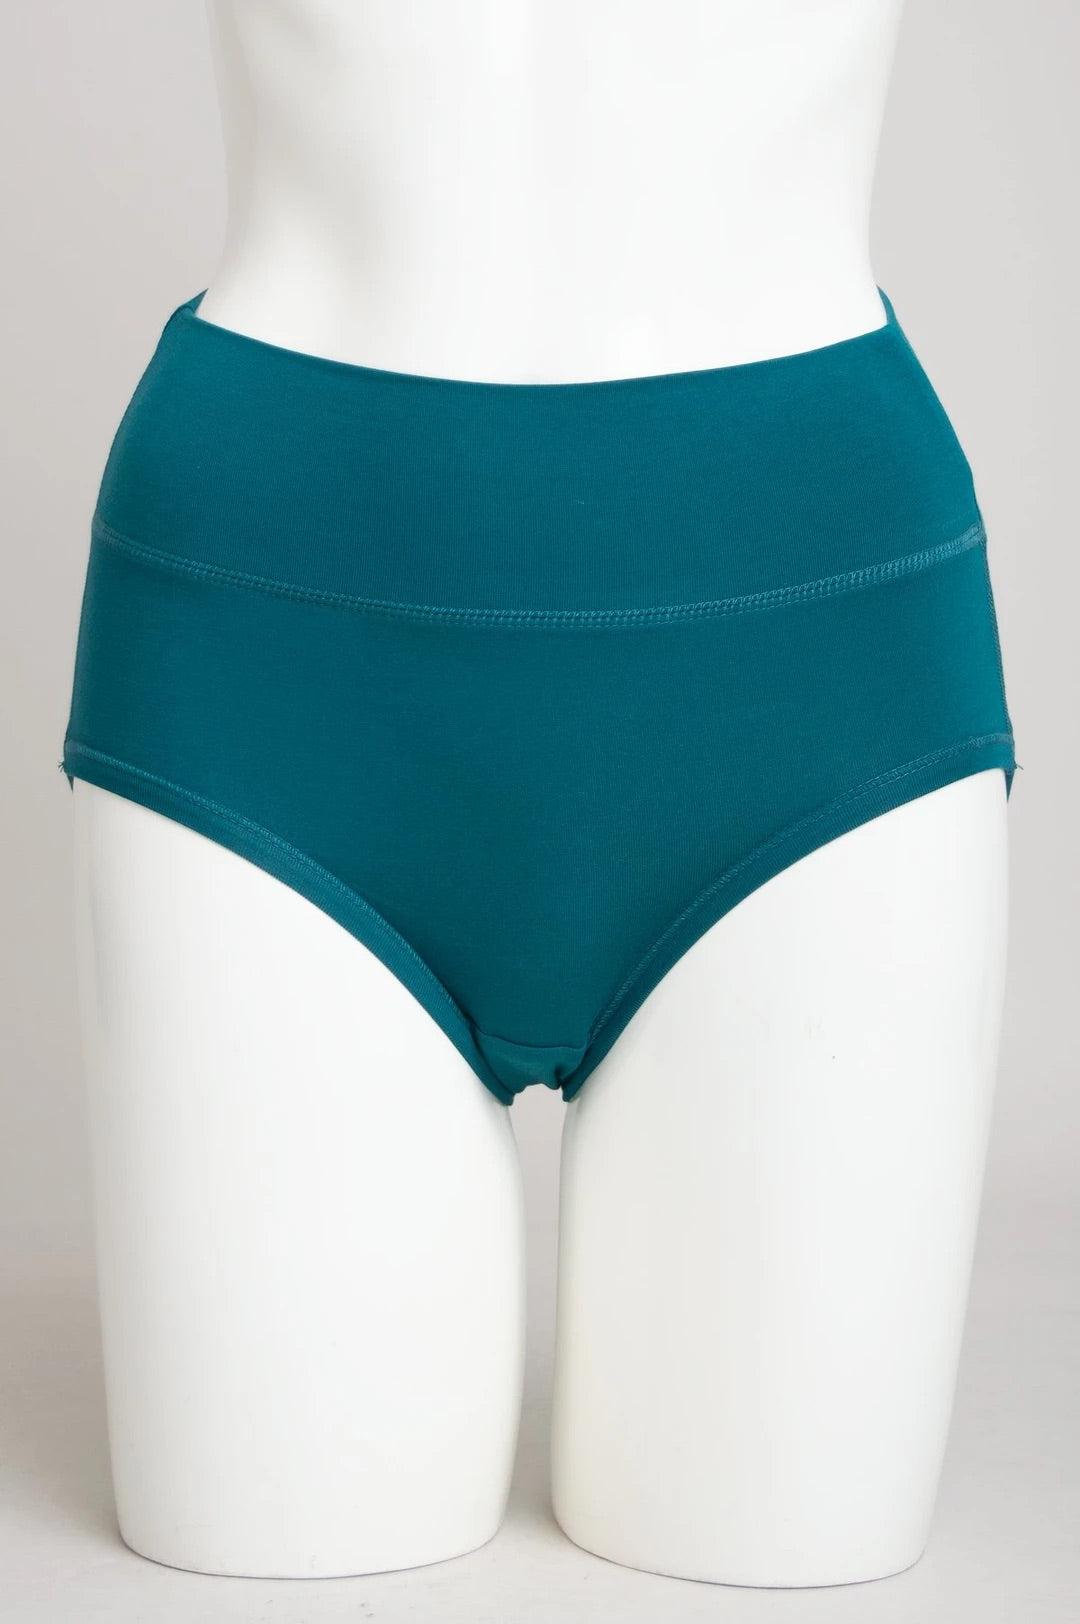 Wholesale plus super size underwear For An Irresistible Look